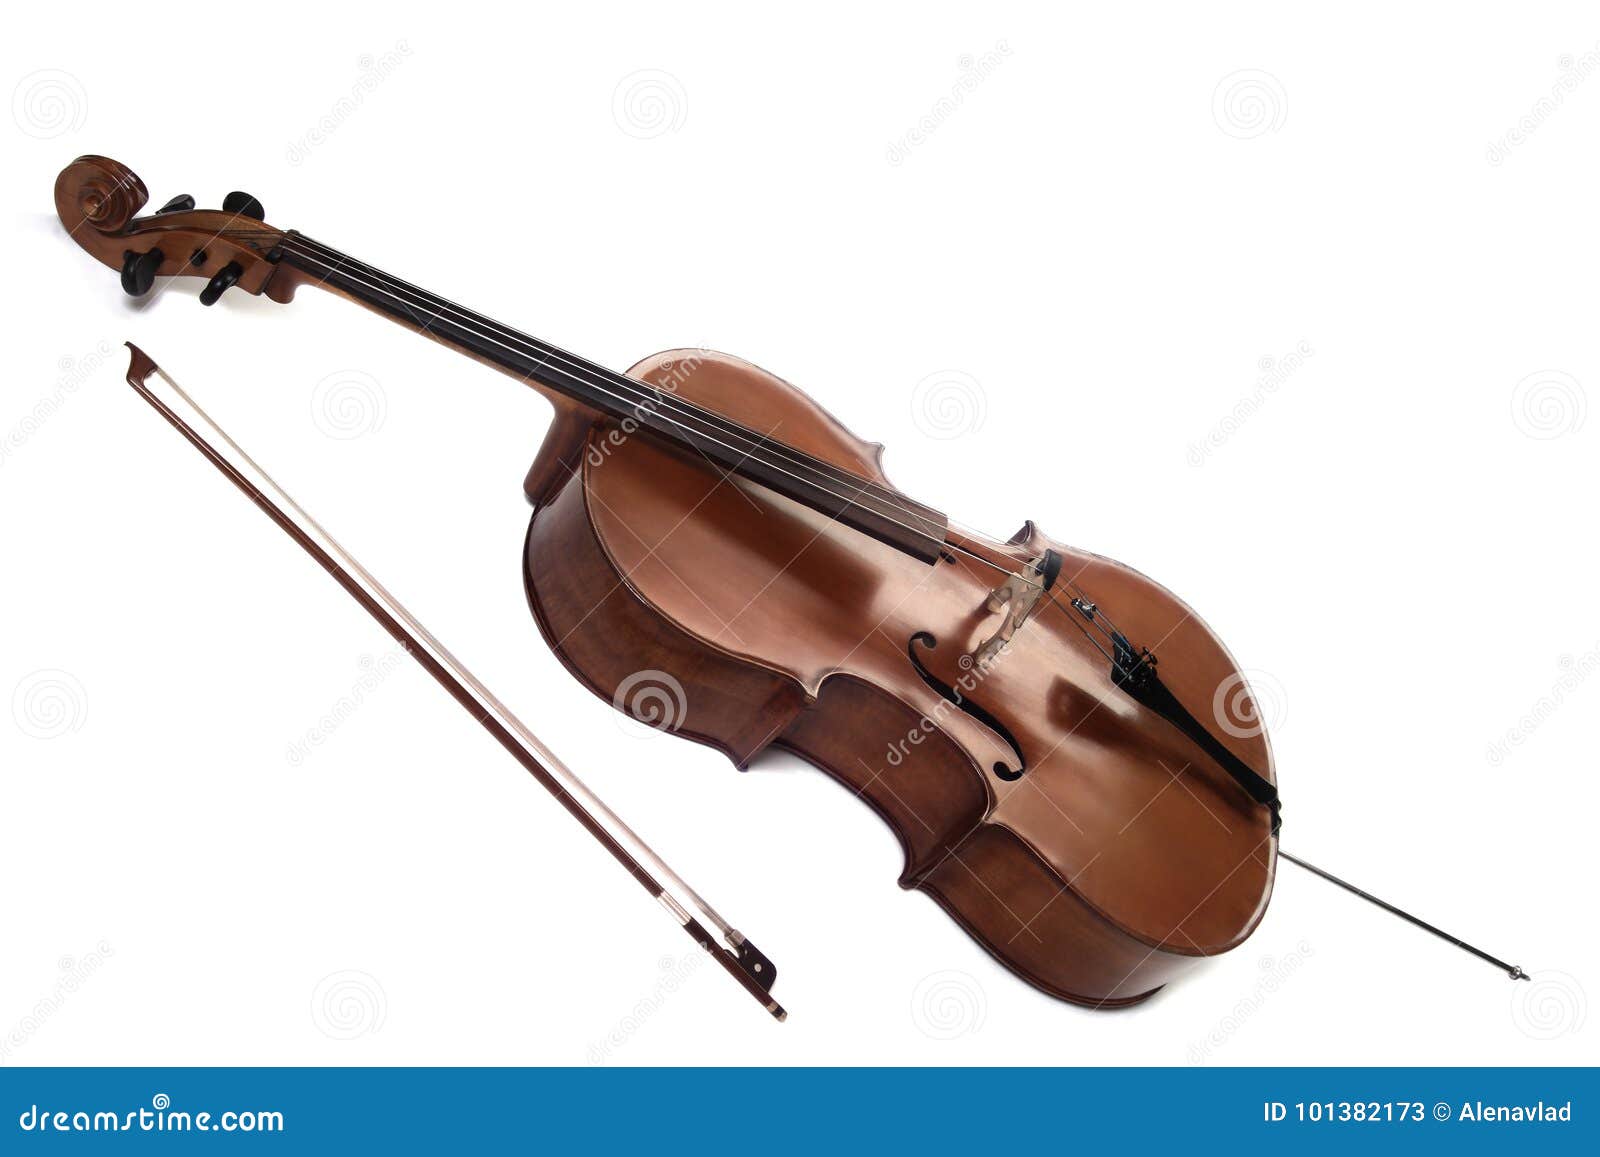 cello musical instruments  on white